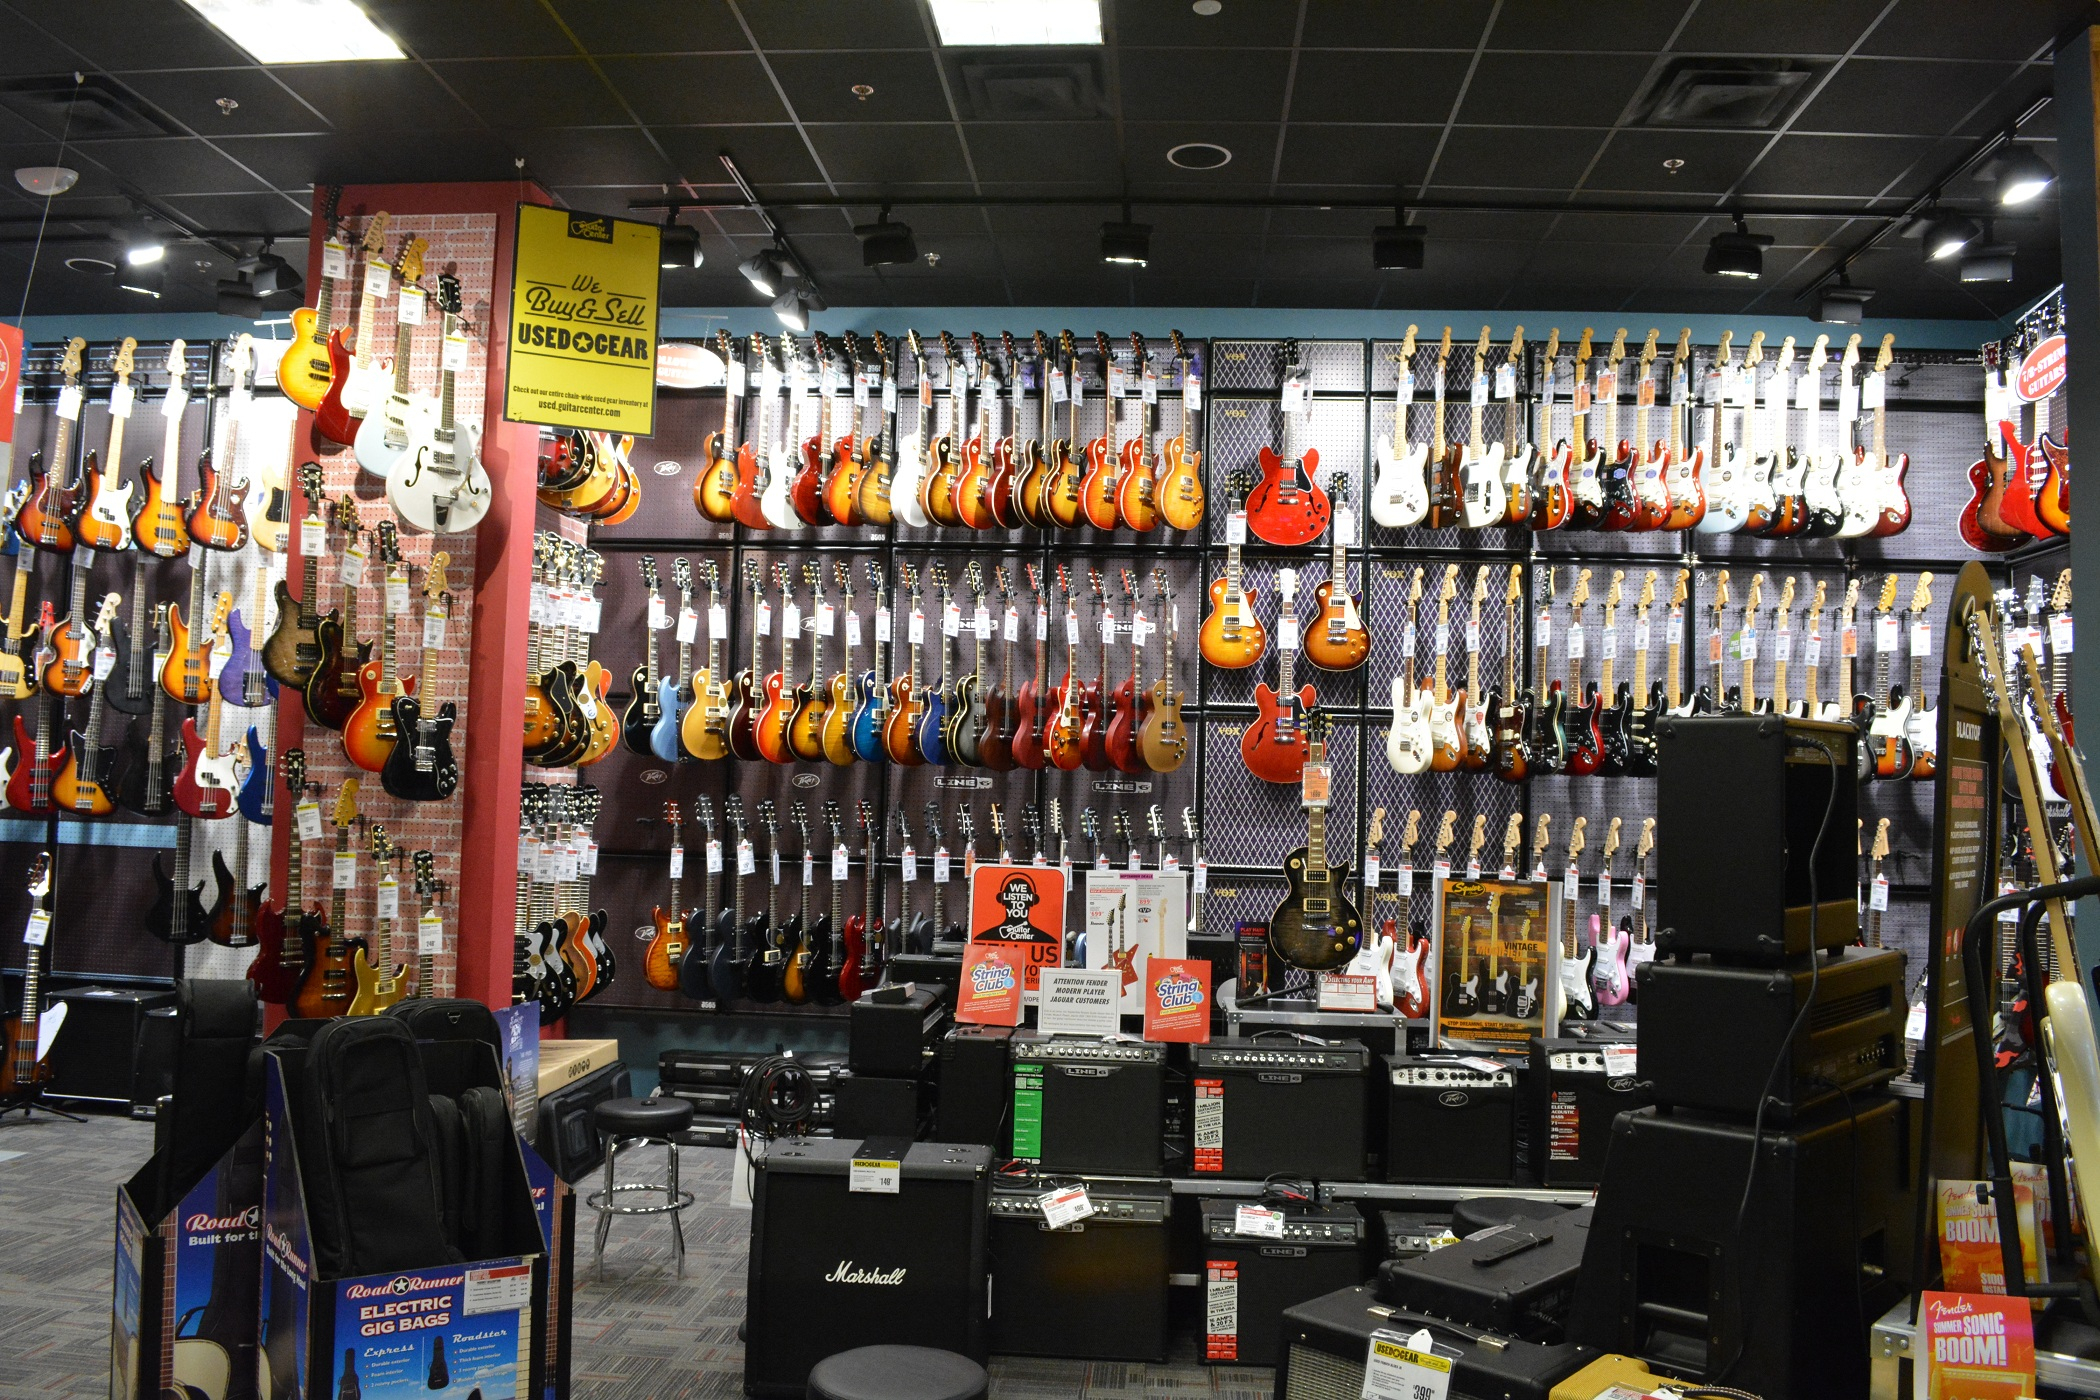 Guitar Lessons Seattle: Guitar Center Lessons Near Me